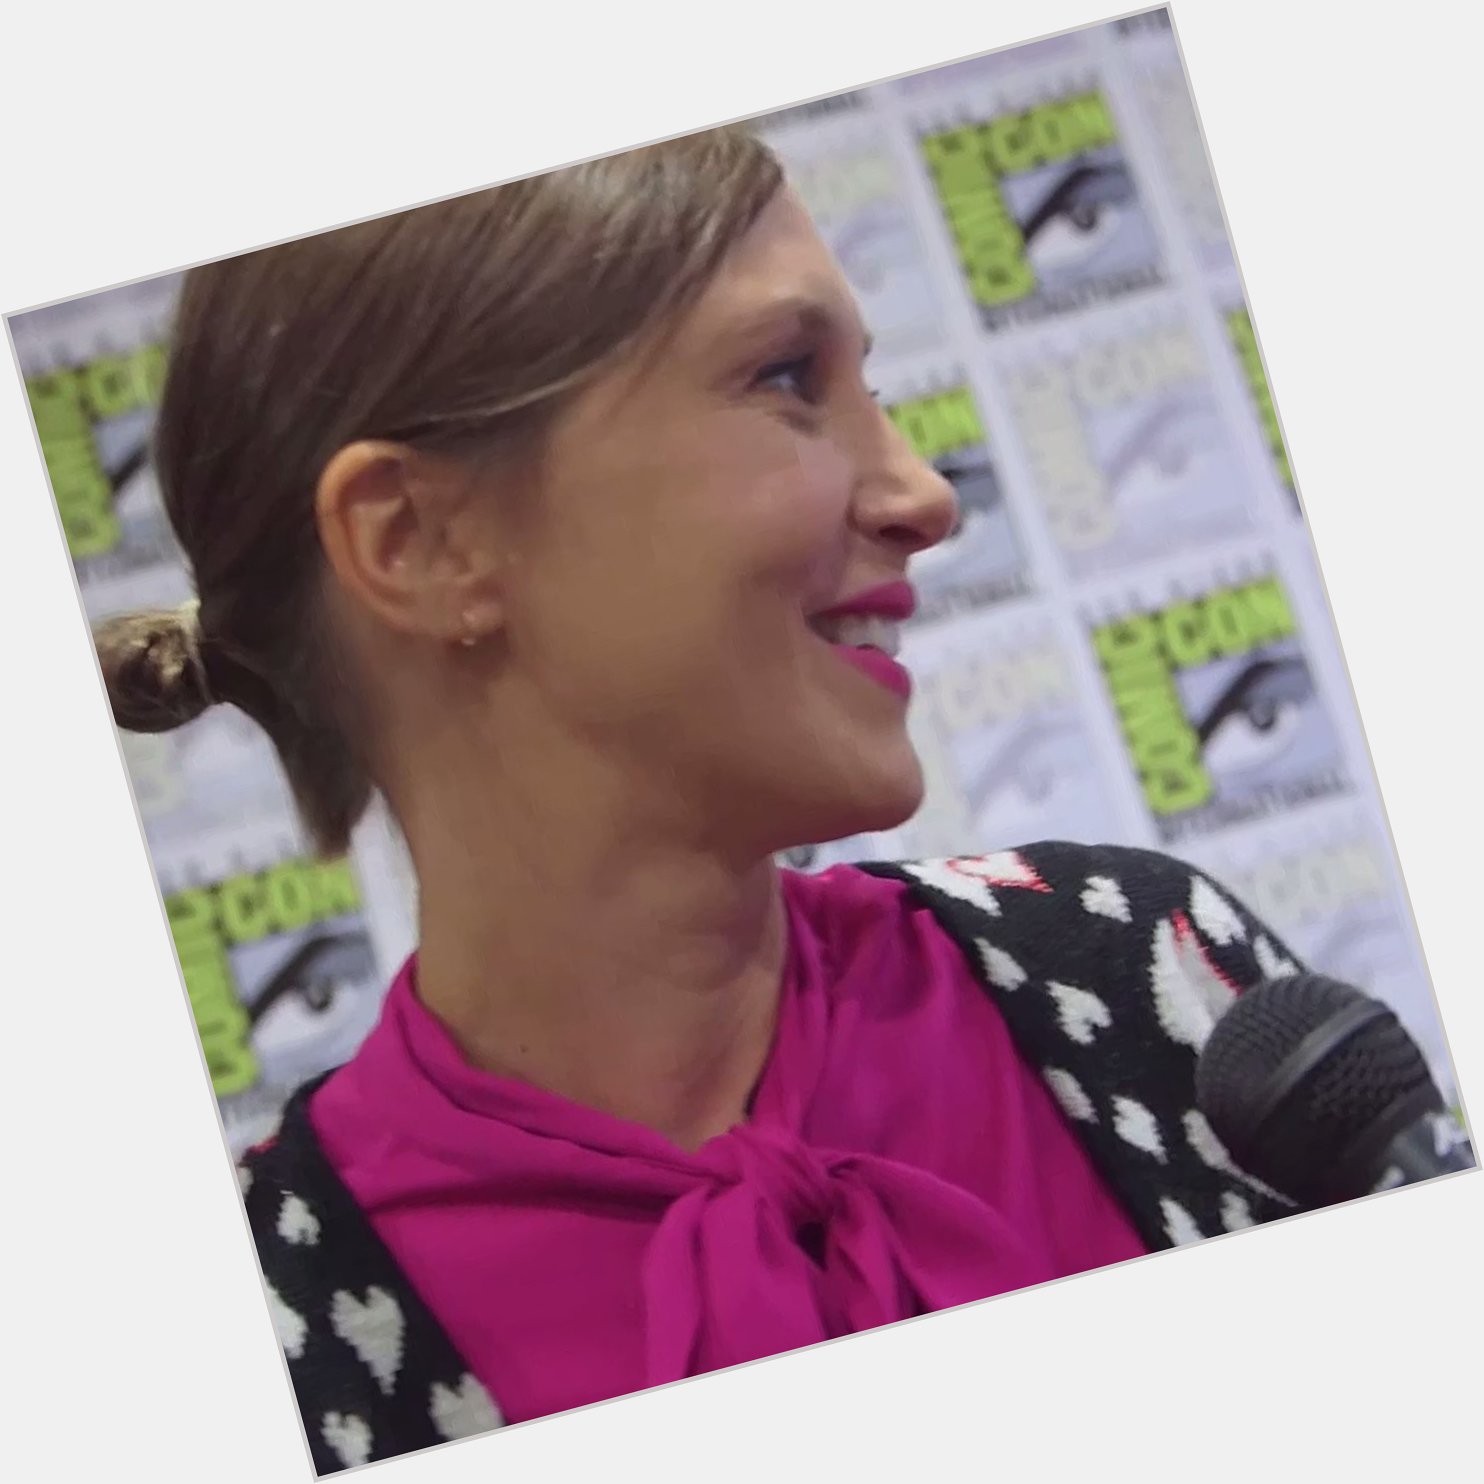 One of the best actresses in the industry and the best of the conjuring universe, happy bday vera farmiga  